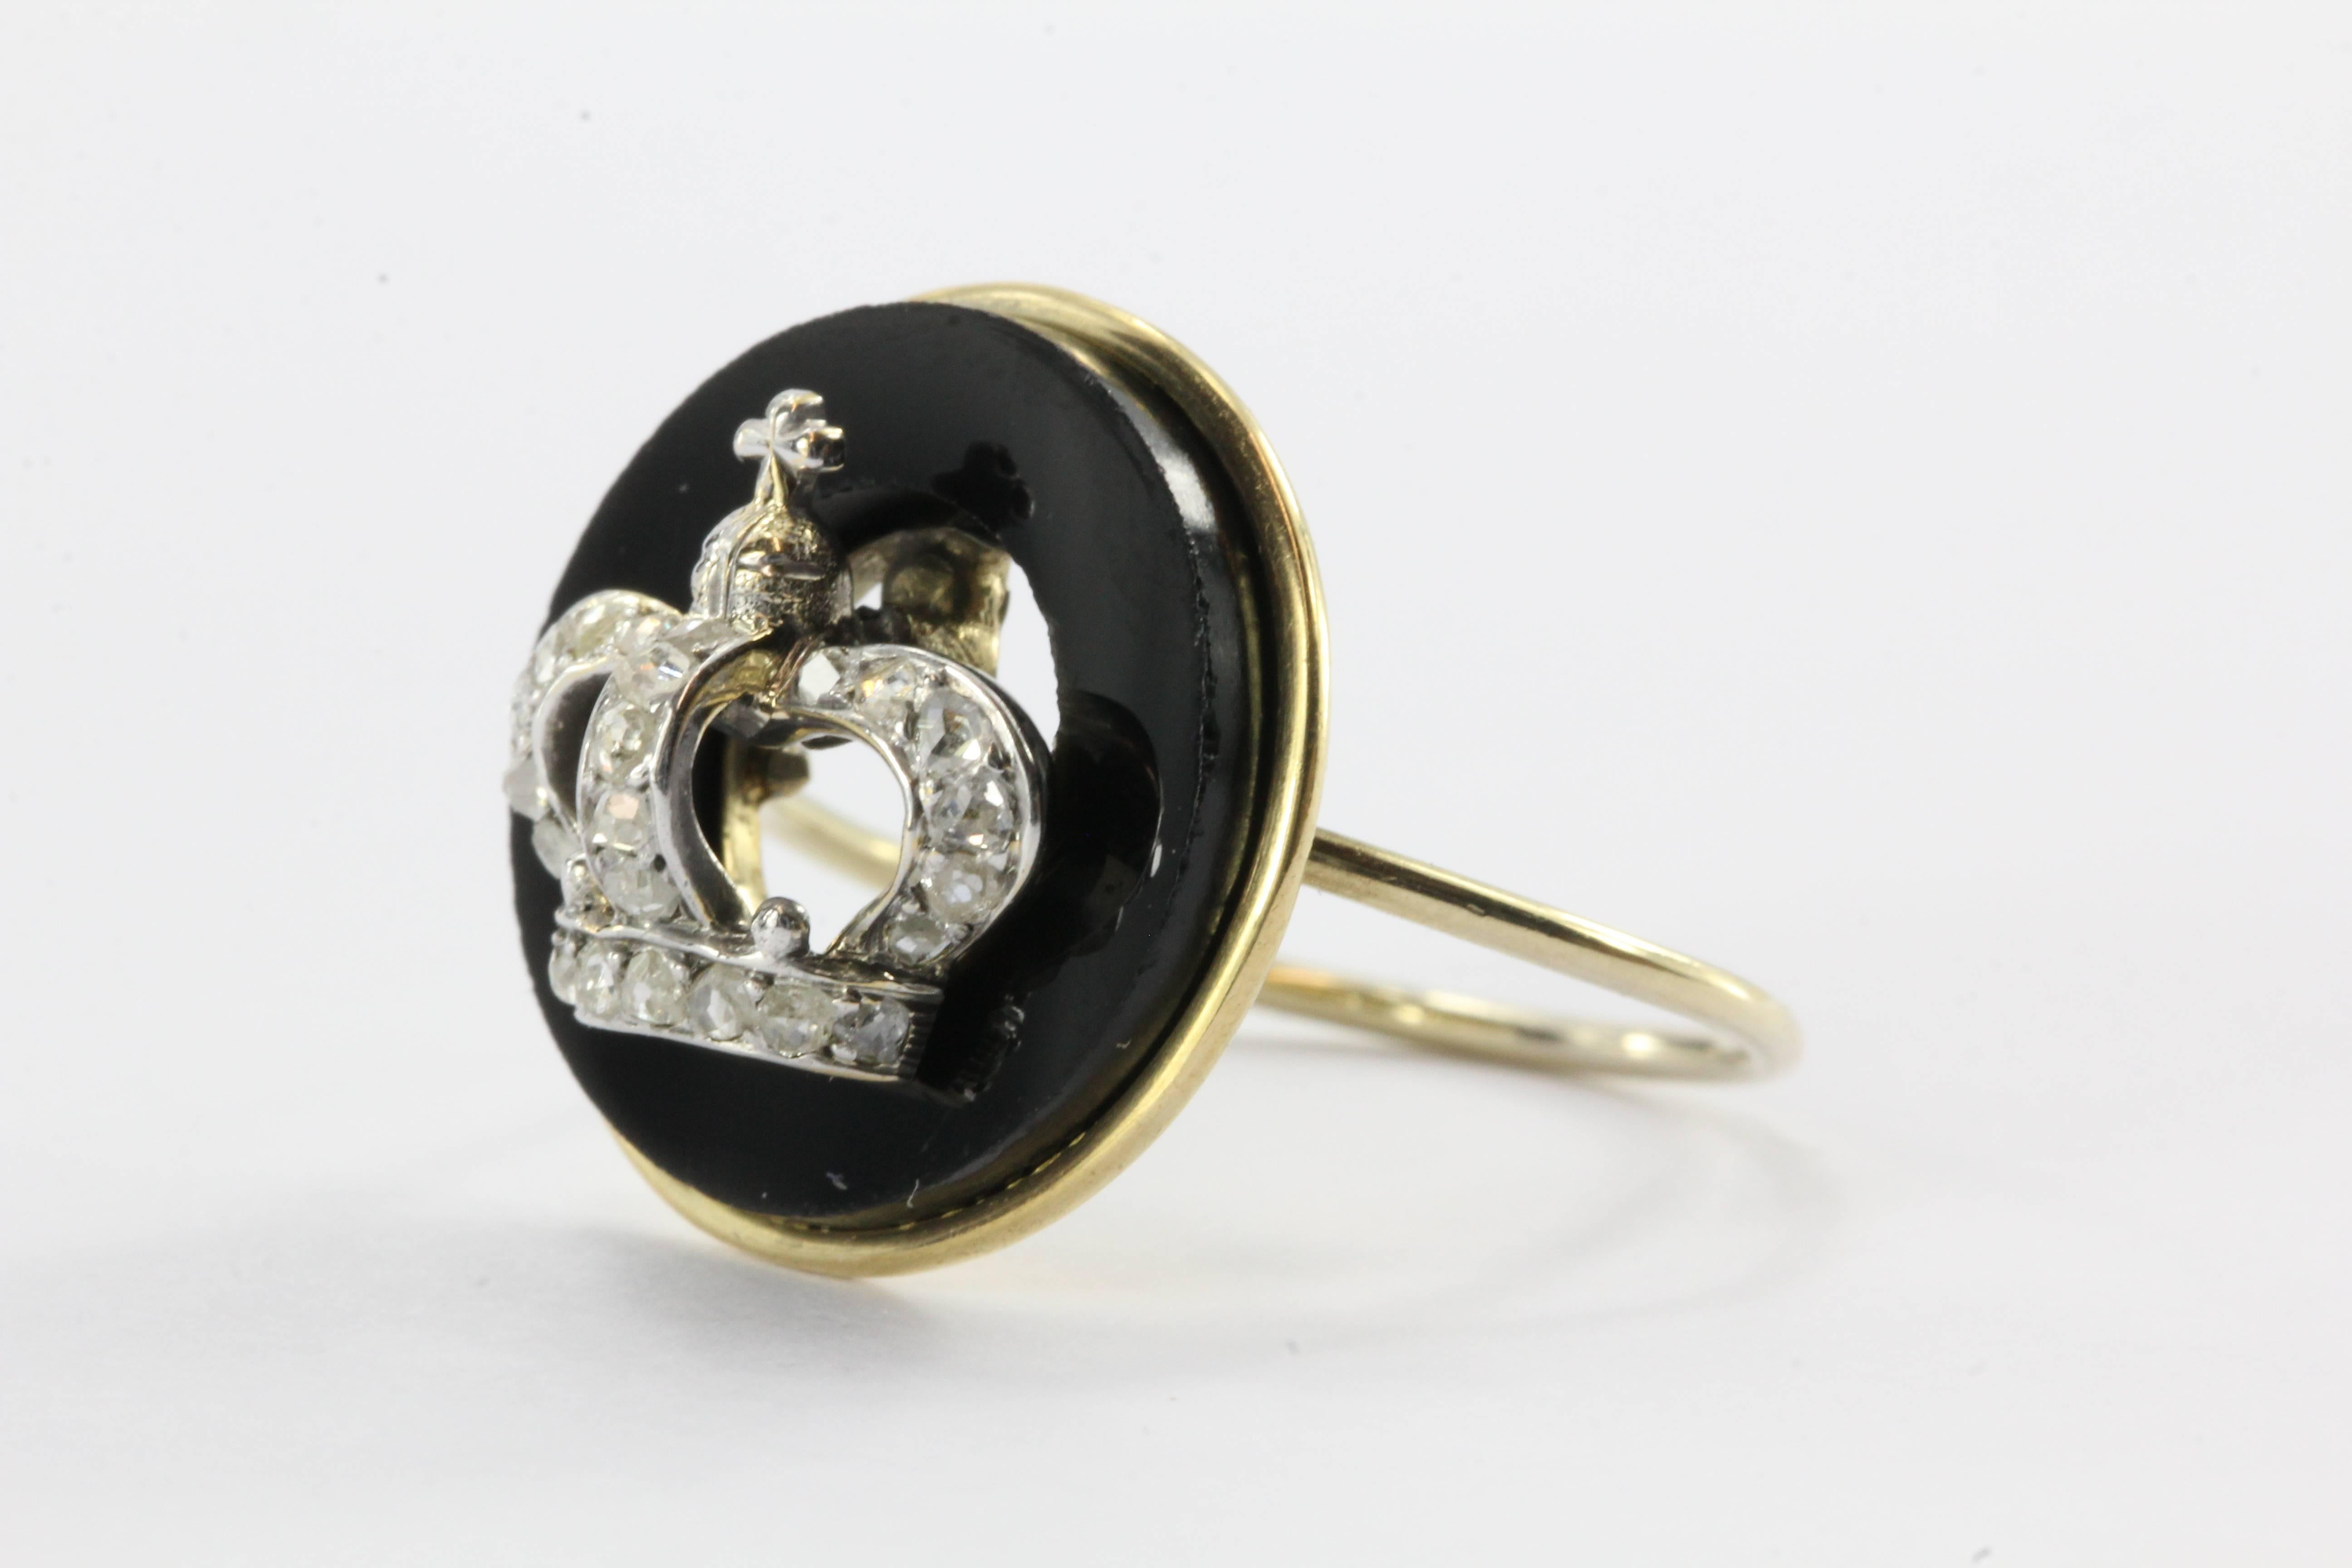 Victorian 18K Rose Cut Diamond & Onyx Royal Crown Signet Conversion Ring. The ring is in excellent estate condition and ready to wear. It was professionally converted from a hat pin to a ring. The ring band is made of 10K yellow gold. The cap is 18K